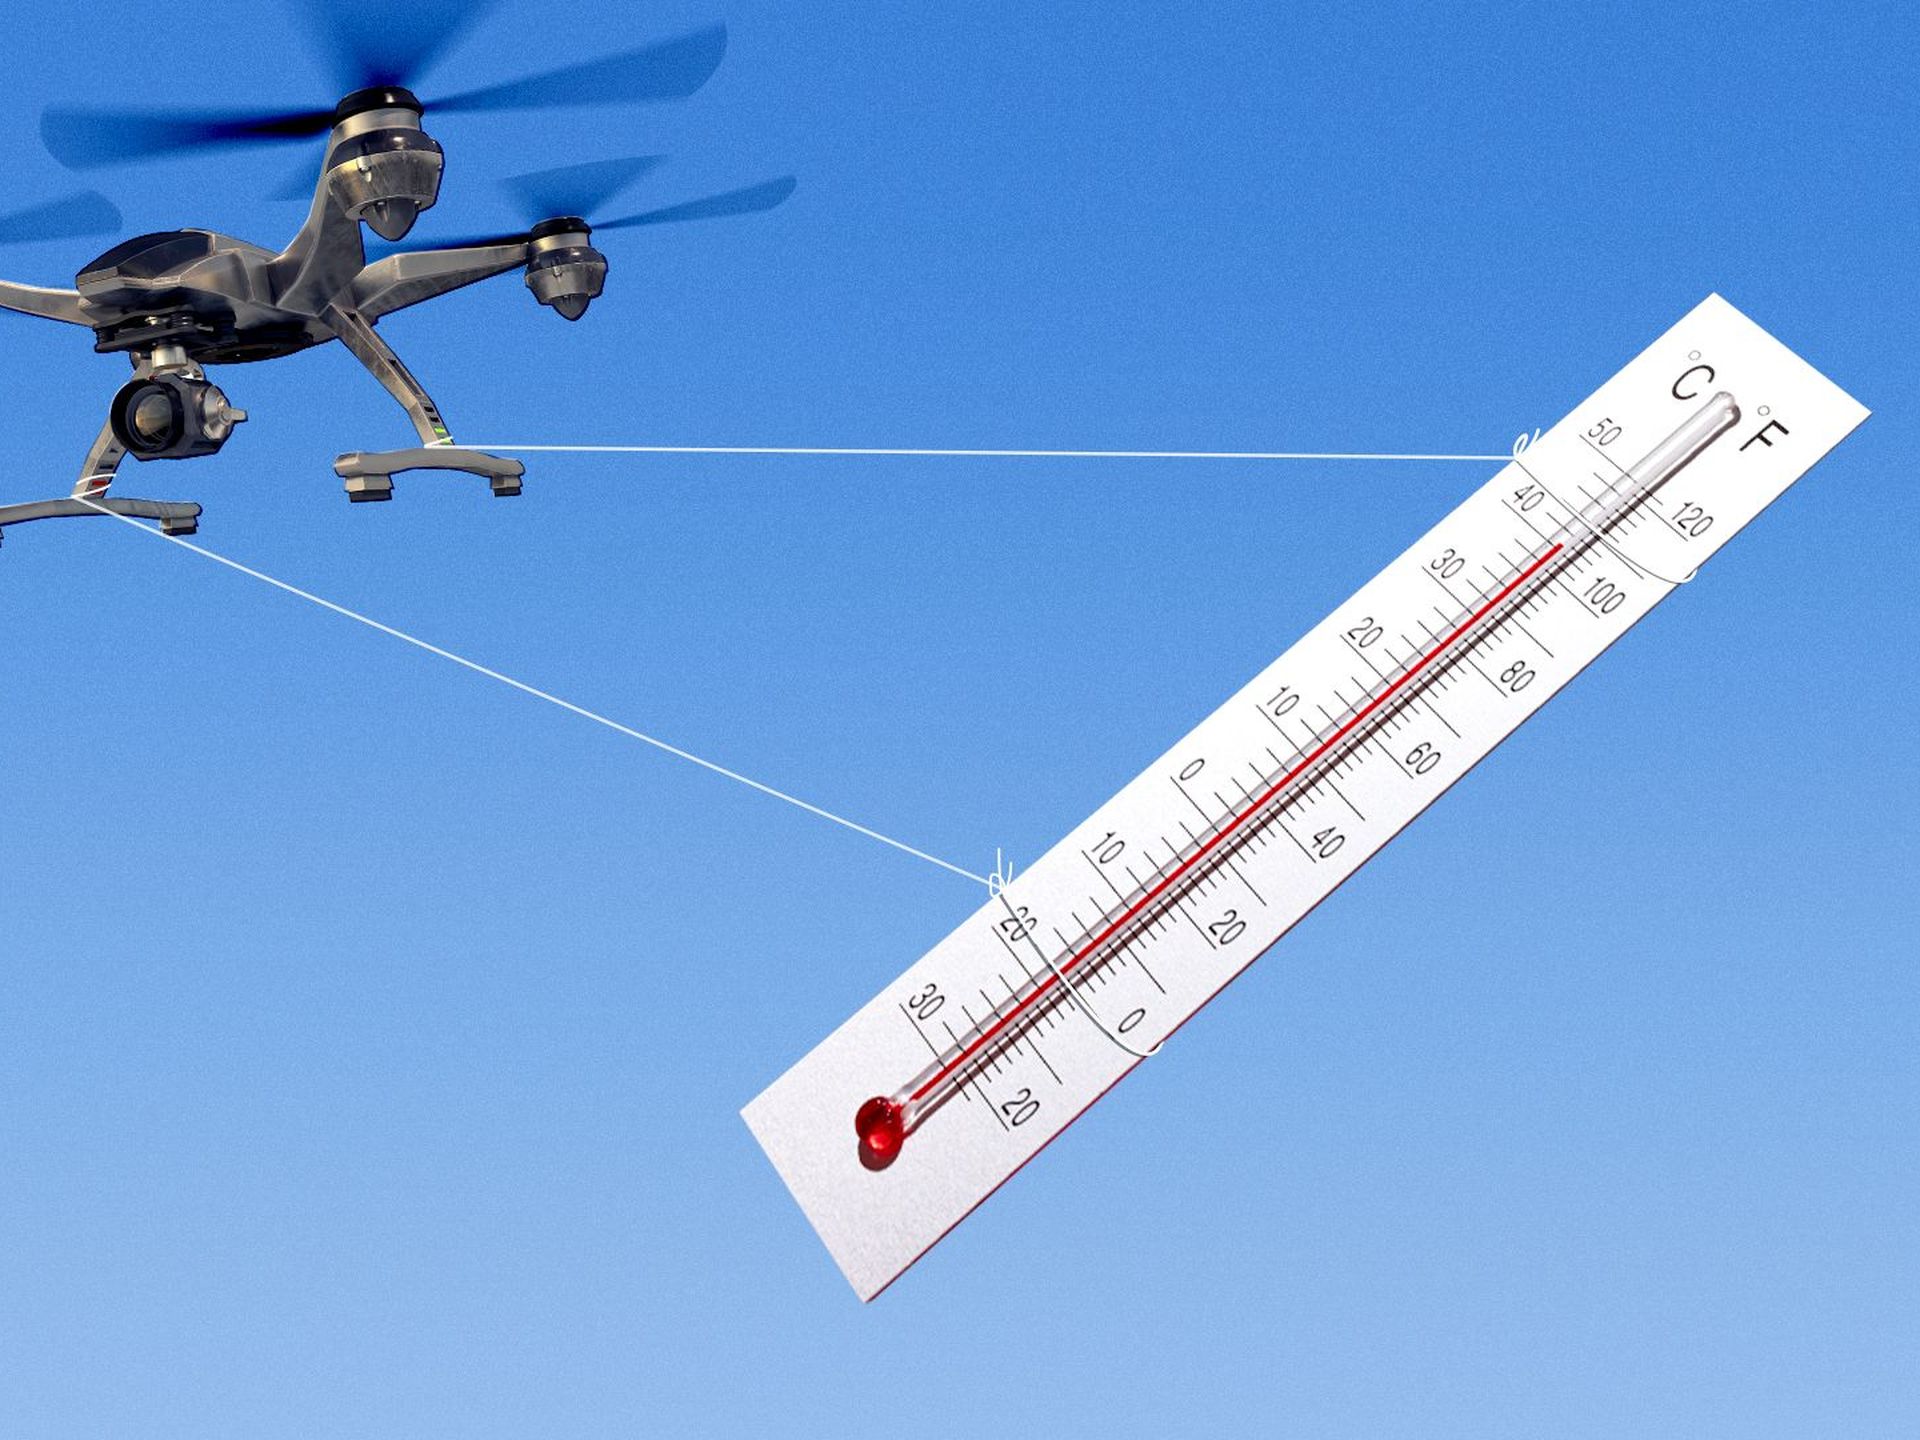 Using small drones to measure wind speeds in